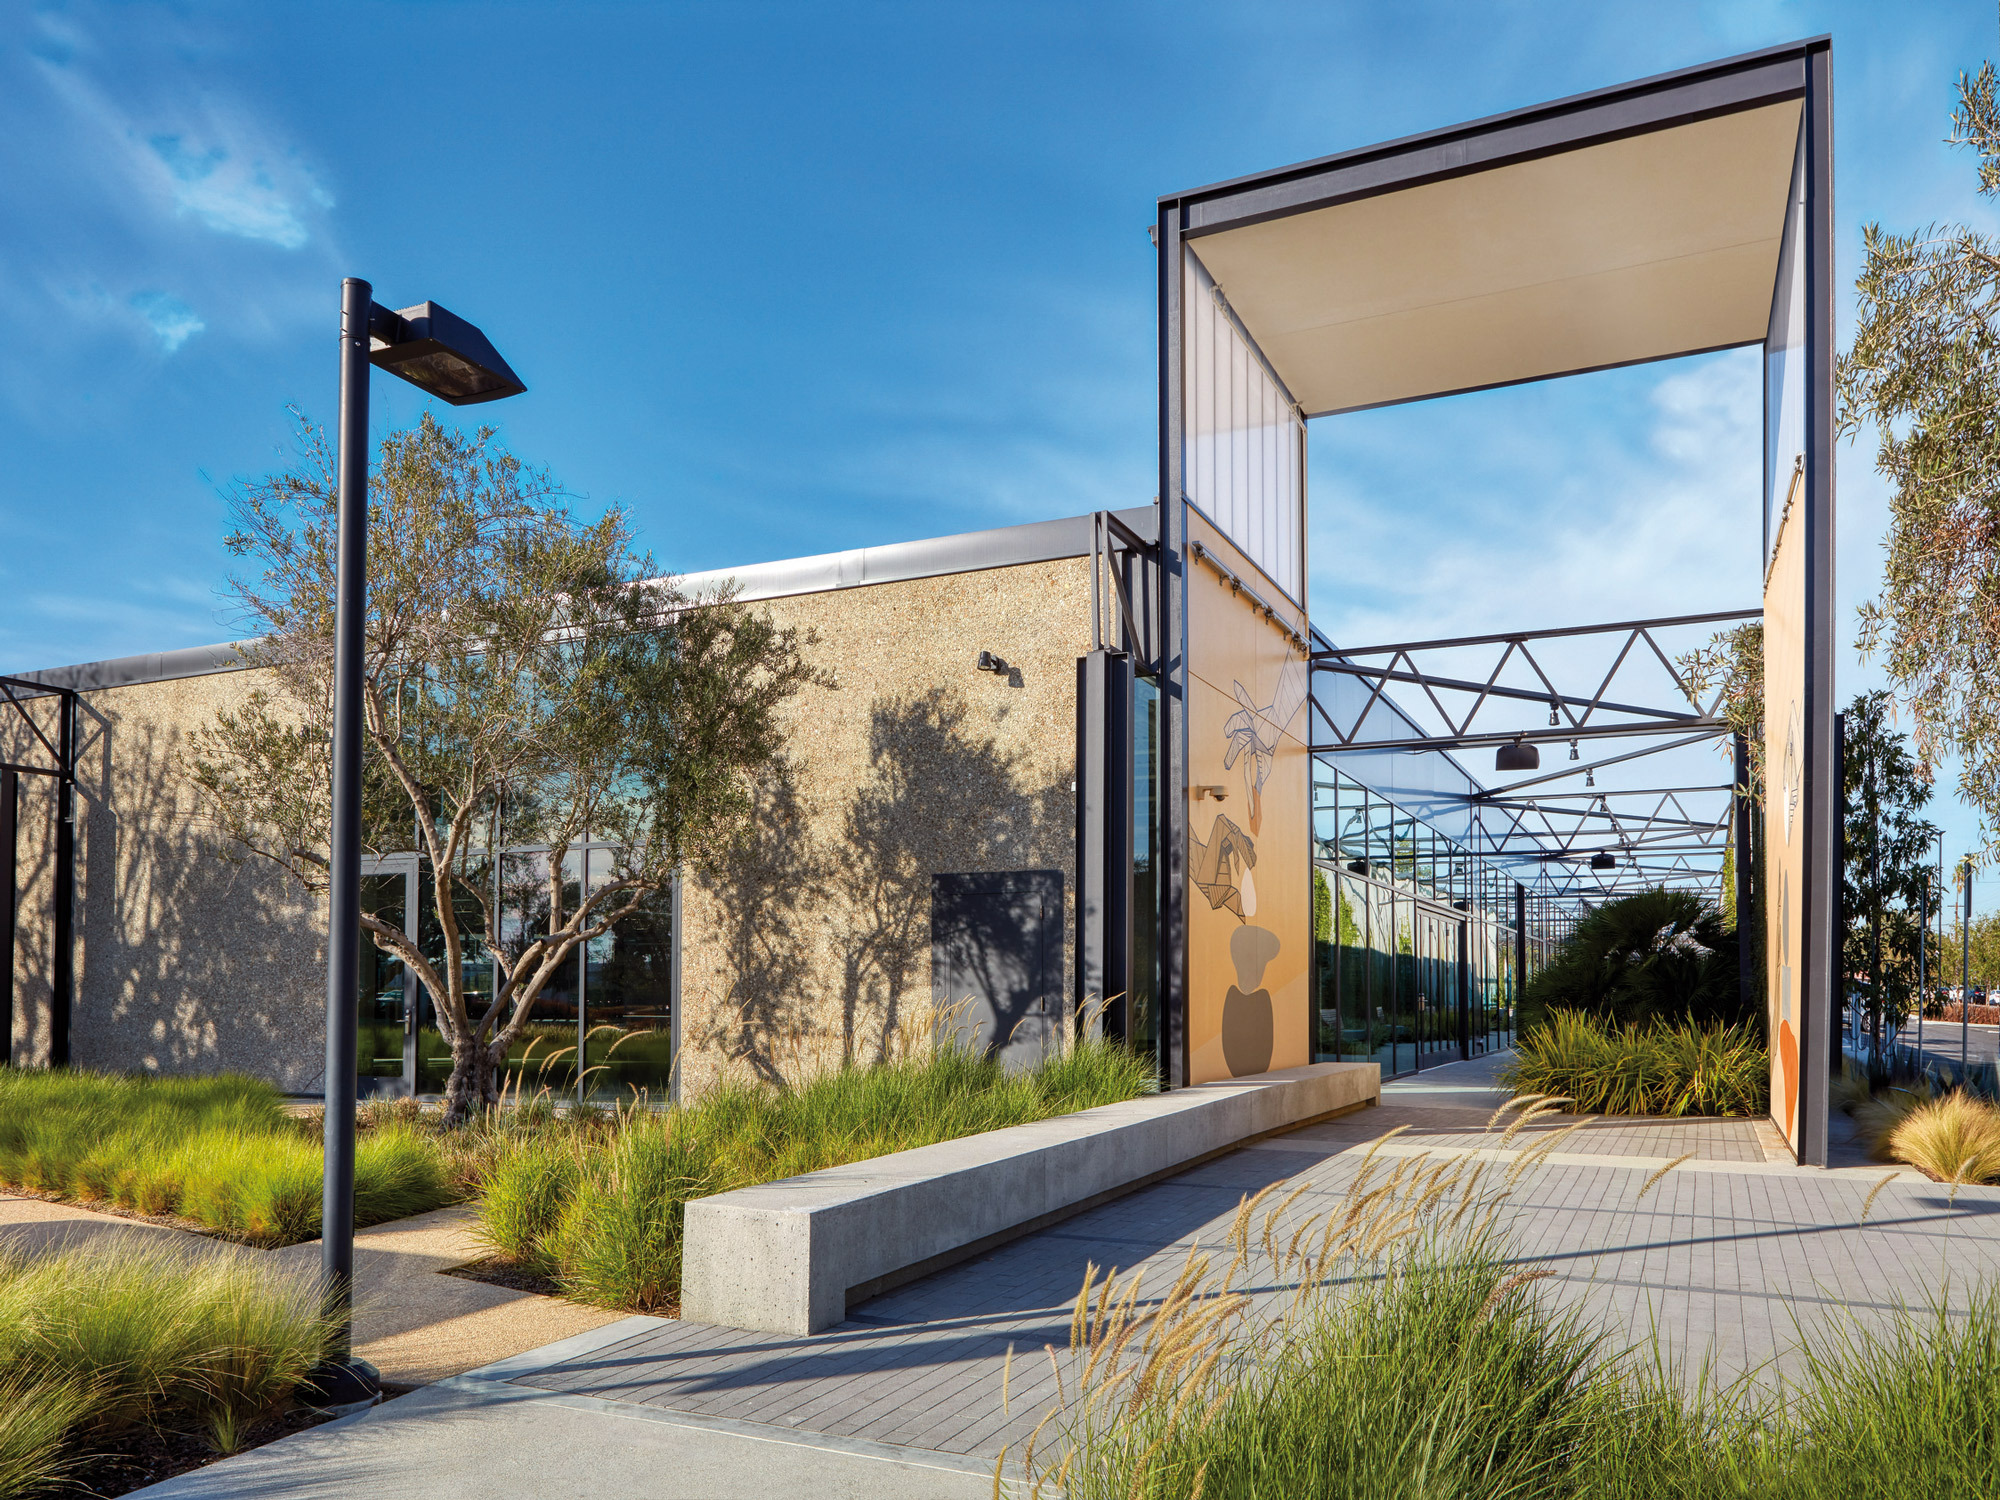 Modern commercial building entrance with full-height glass doors, framed by sleek steel beams and a cantilevered canopy. Landscaped with ornamental grasses and concrete steps, it blends functional design with natural elements.